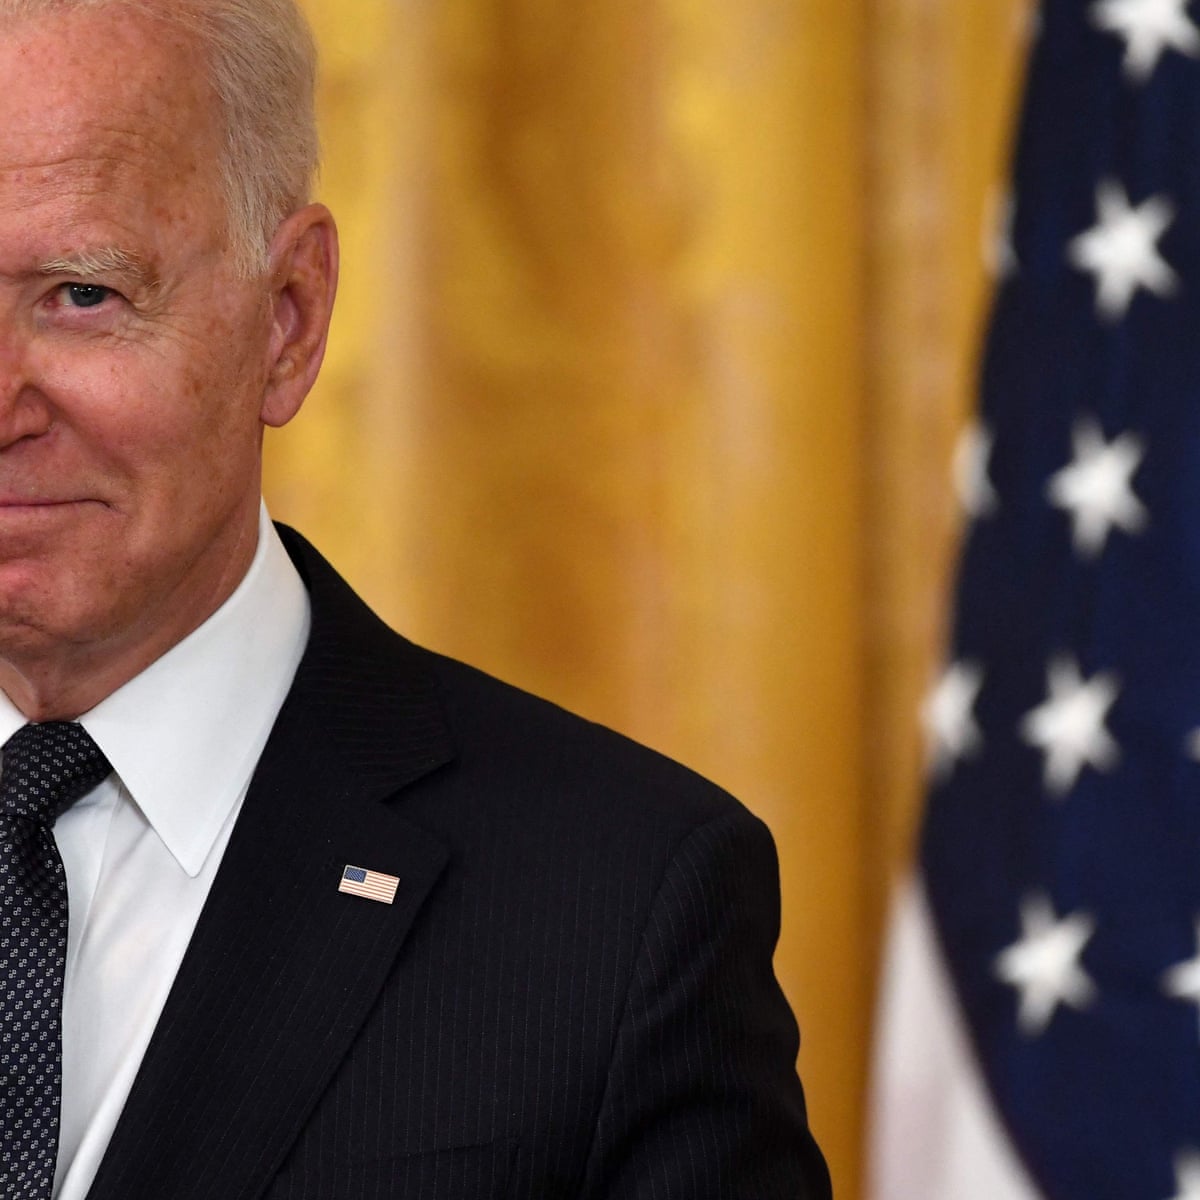 what is joe biden saying about trump - Biden|President|Joe|States|Delaware|Obama|Vice|Senate|Campaign|Election|Time|Administration|House|Law|People|Years|Family|Year|Trump|School|University|Senator|Office|Party|Country|Committee|Act|War|Days|Climate|Hunter|Health|America|State|Day|Democrats|Americans|Documents|Care|Plan|United States|Vice President|White House|Joe Biden|Biden Administration|Democratic Party|Law School|Presidential Election|President Joe Biden|Executive Orders|Foreign Relations Committee|Presidential Campaign|Second Term|47Th Vice President|Syracuse University|Climate Change|Hillary Clinton|Last Year|Barack Obama|Joseph Robinette Biden|U.S. Senator|Health Care|U.S. Senate|Donald Trump|President Trump|President Biden|Federal Register|Judiciary Committee|Presidential Nomination|Presidential Medal